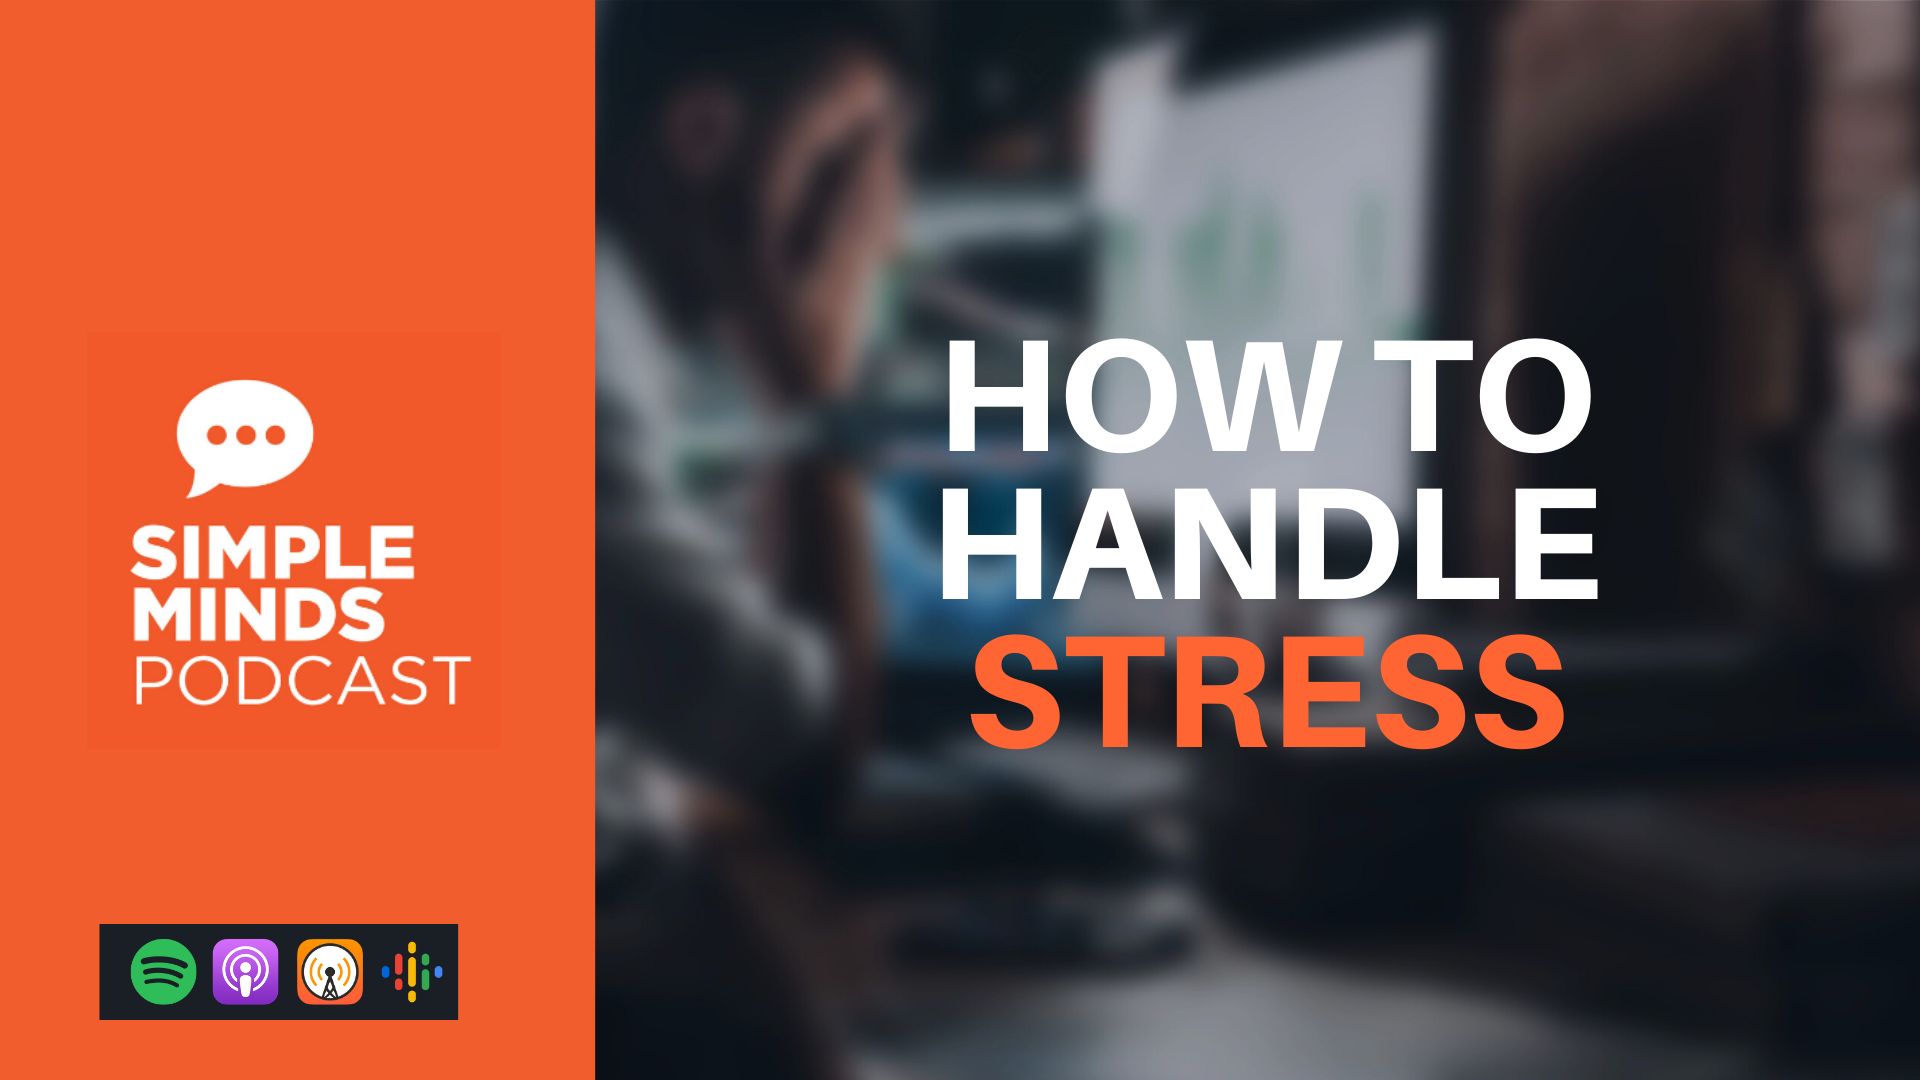 How To Handle Stress